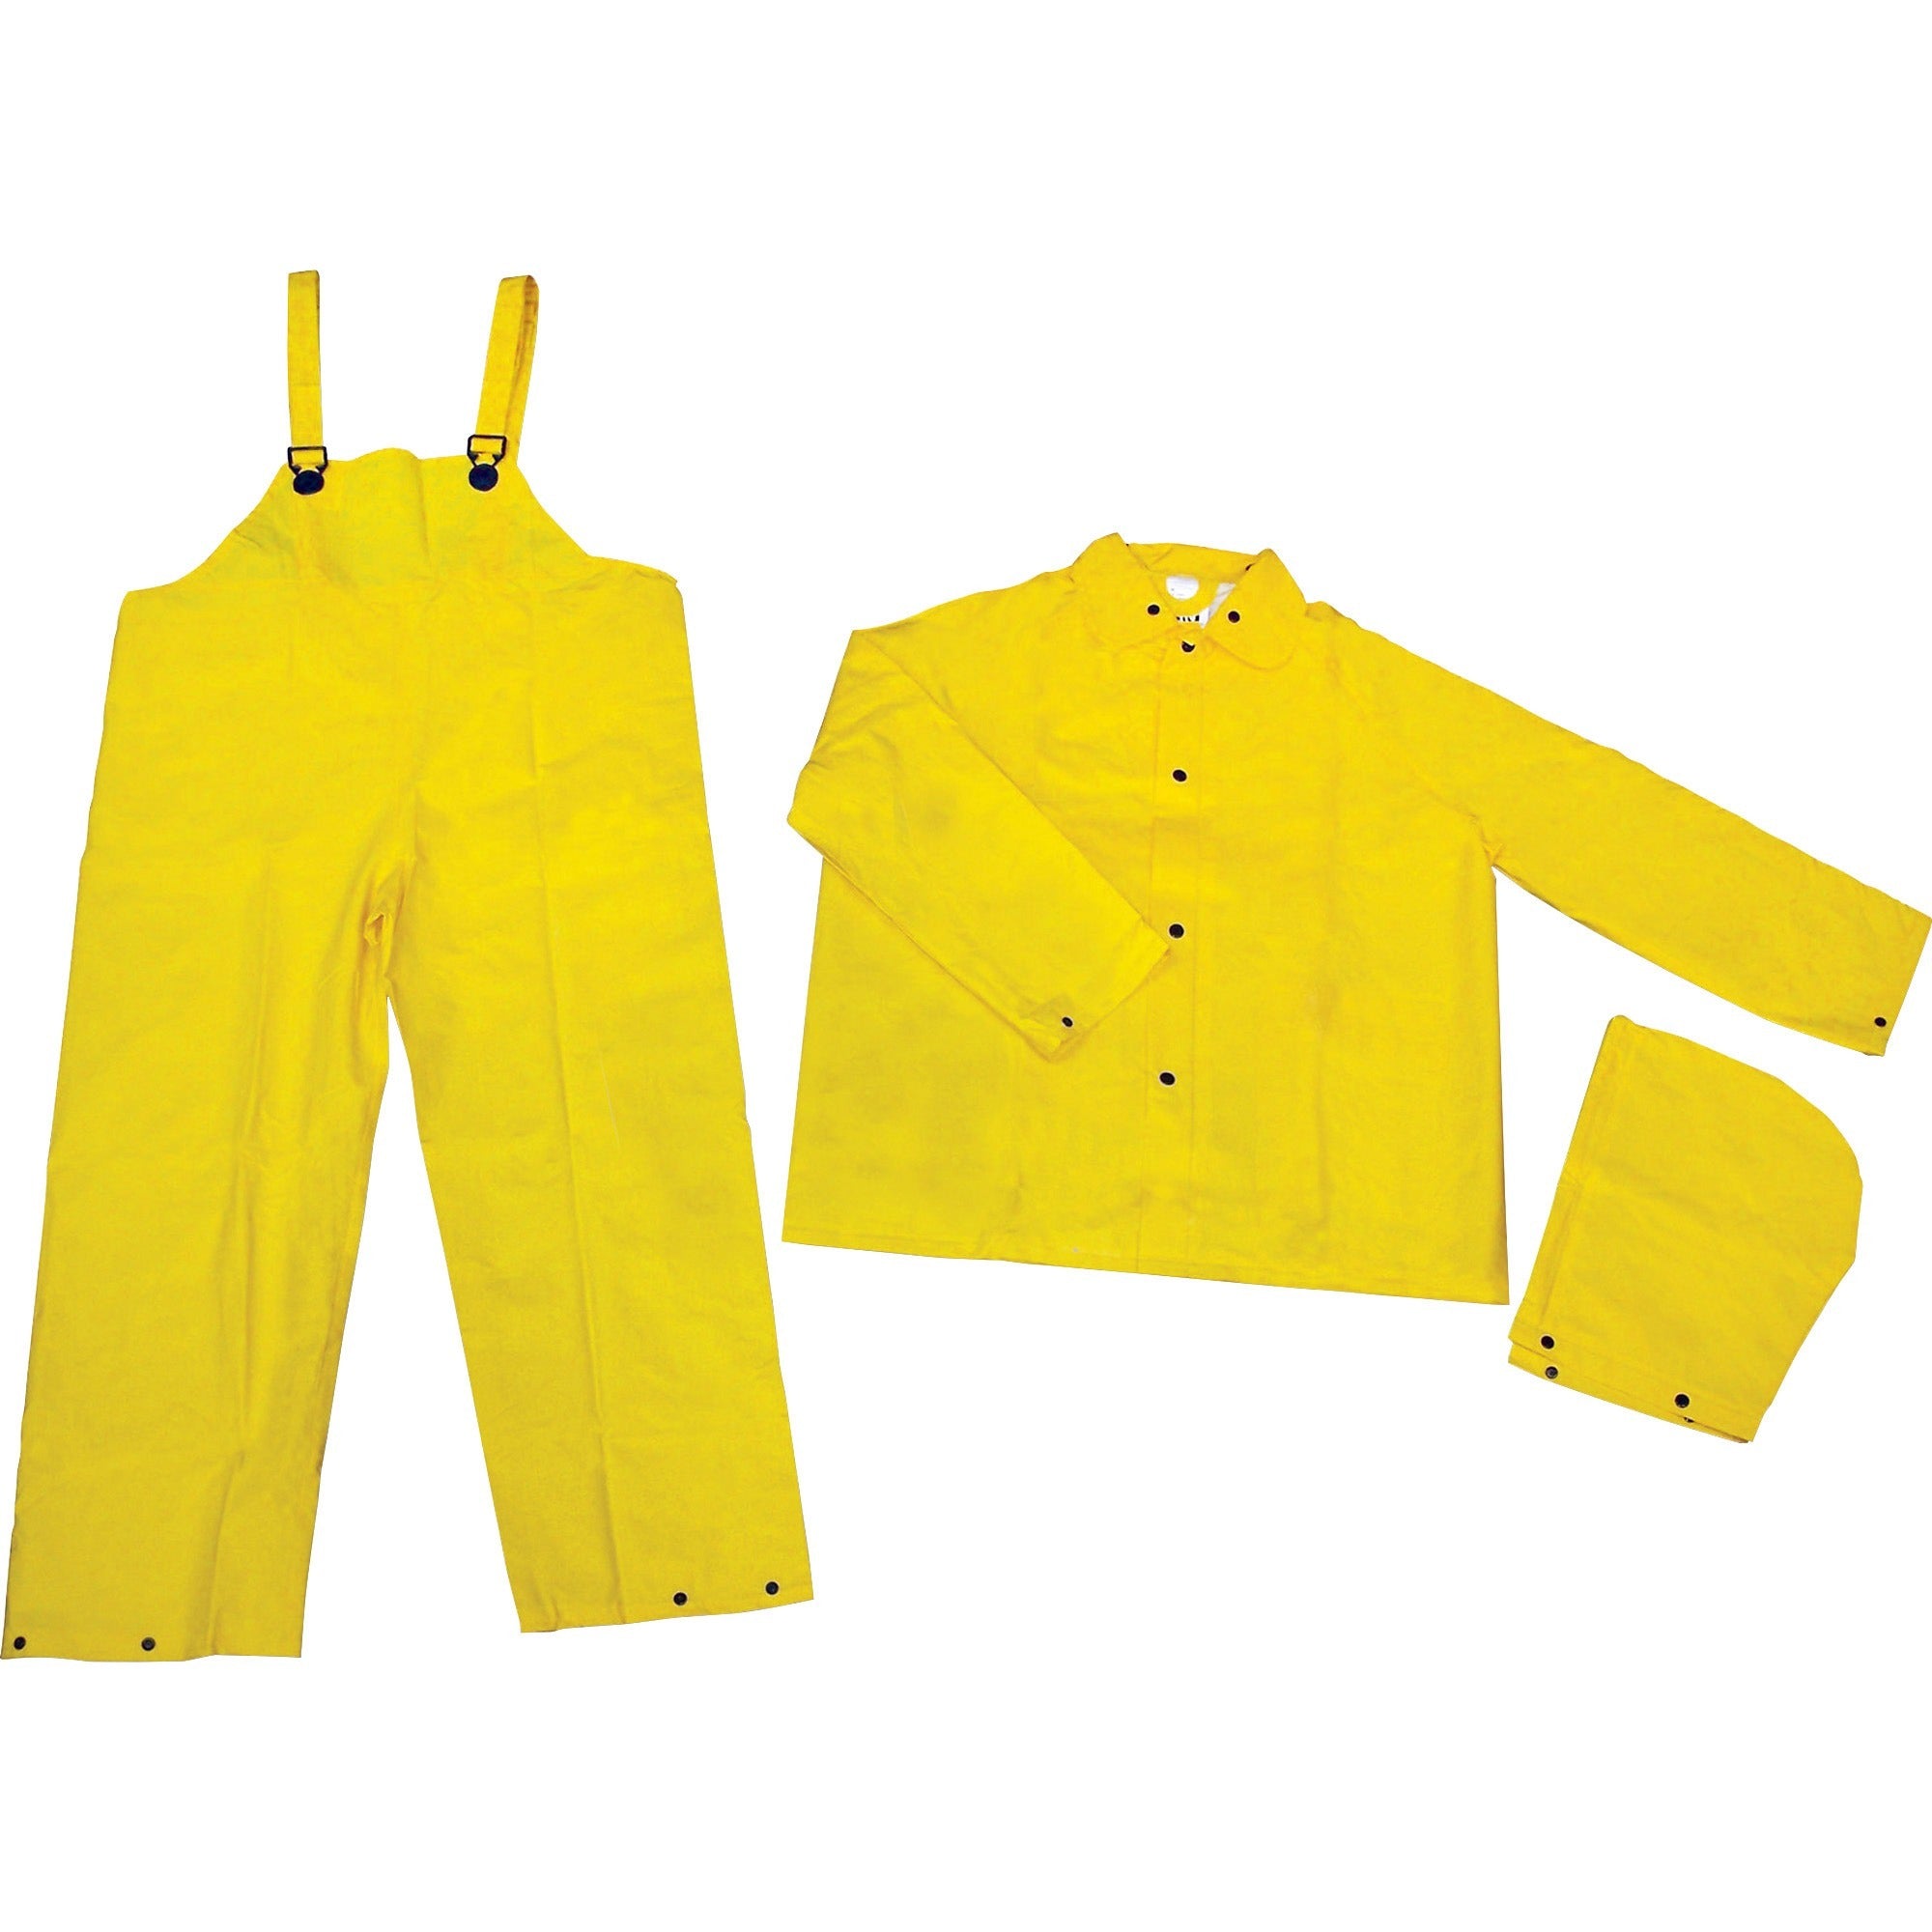 river-city-three-piece-rainsuit-recommended-for-agriculture-construction-transportation-sanitation-carpentry-landscaping-extra-large-size-water-protection-snap-closure-polyester-polyvinyl-chloride-pvc-yellow-1-each_mcs2003xl - 1